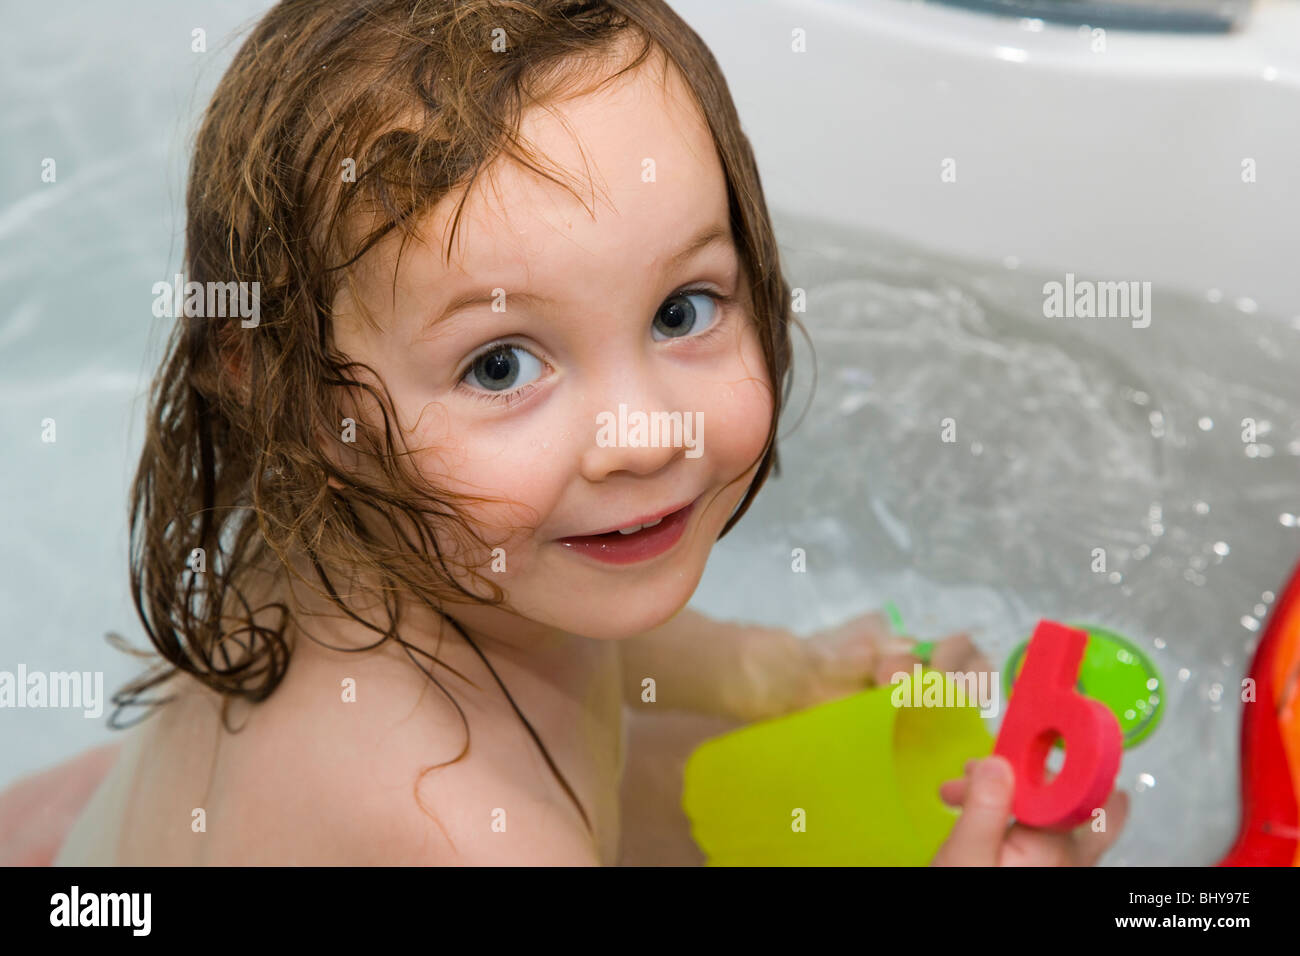 2 year old girl playing with toys in bath Stock Photo - Alamy